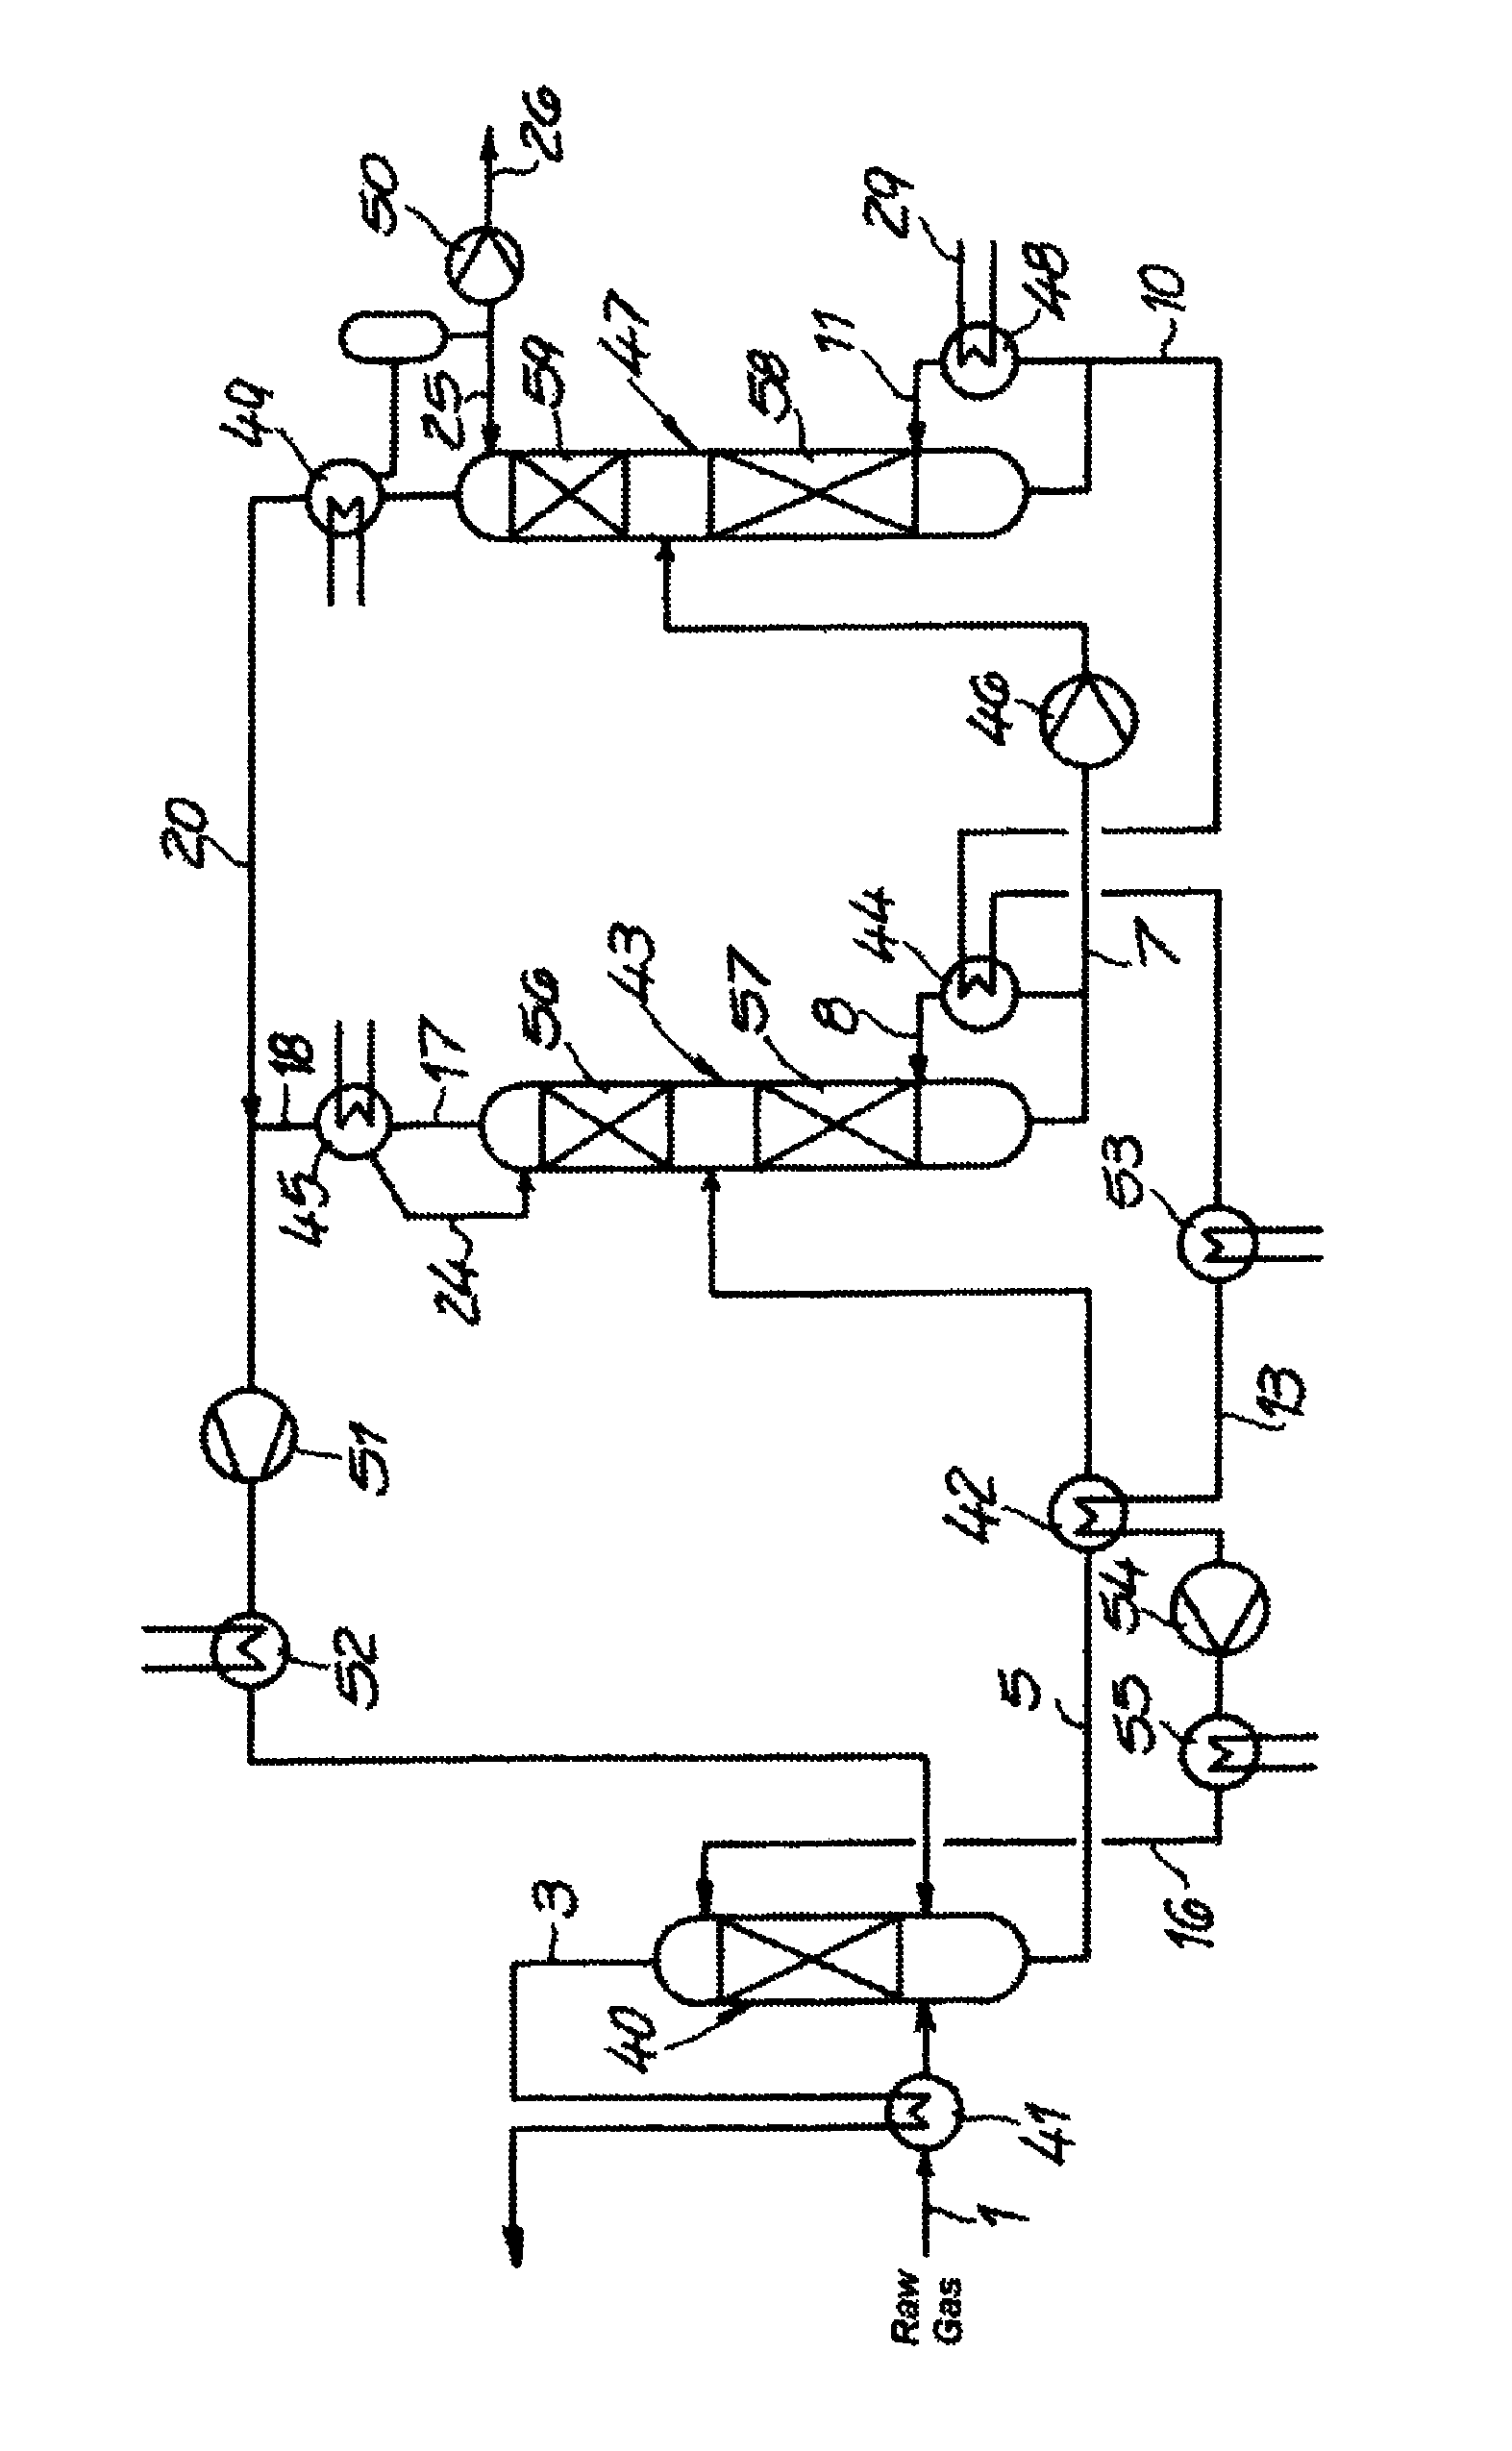 Method for purifying gases and obtaining acid gases